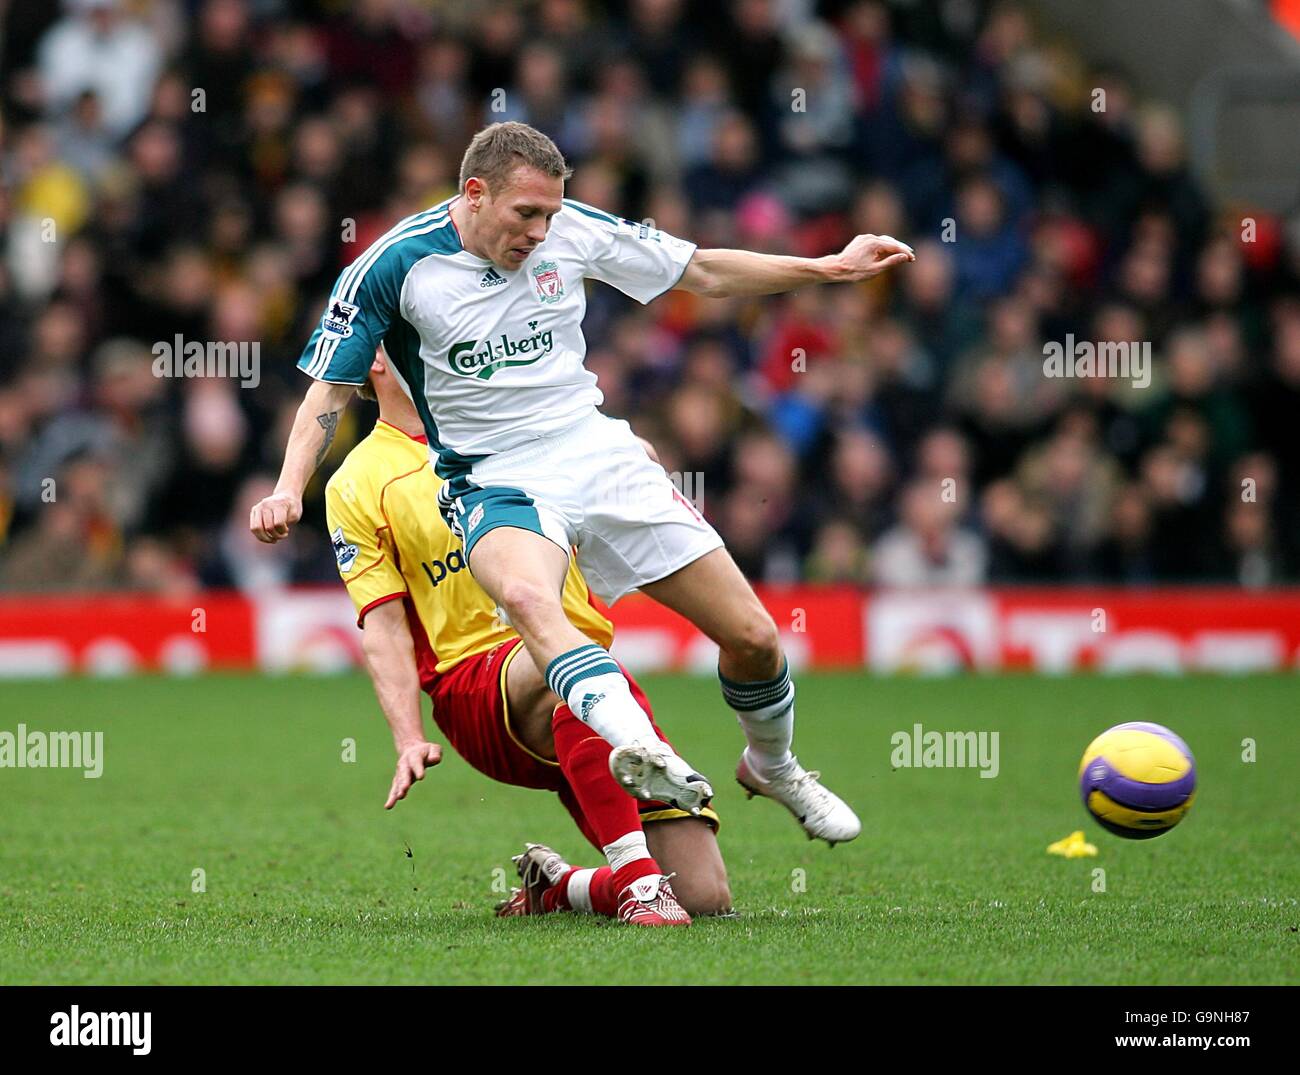 Soccer - FA Barclays Premiership - Watford v Liverpool - Vicarage Road. Liverpool's Craig Bellamy is challenged from behind Stock Photo